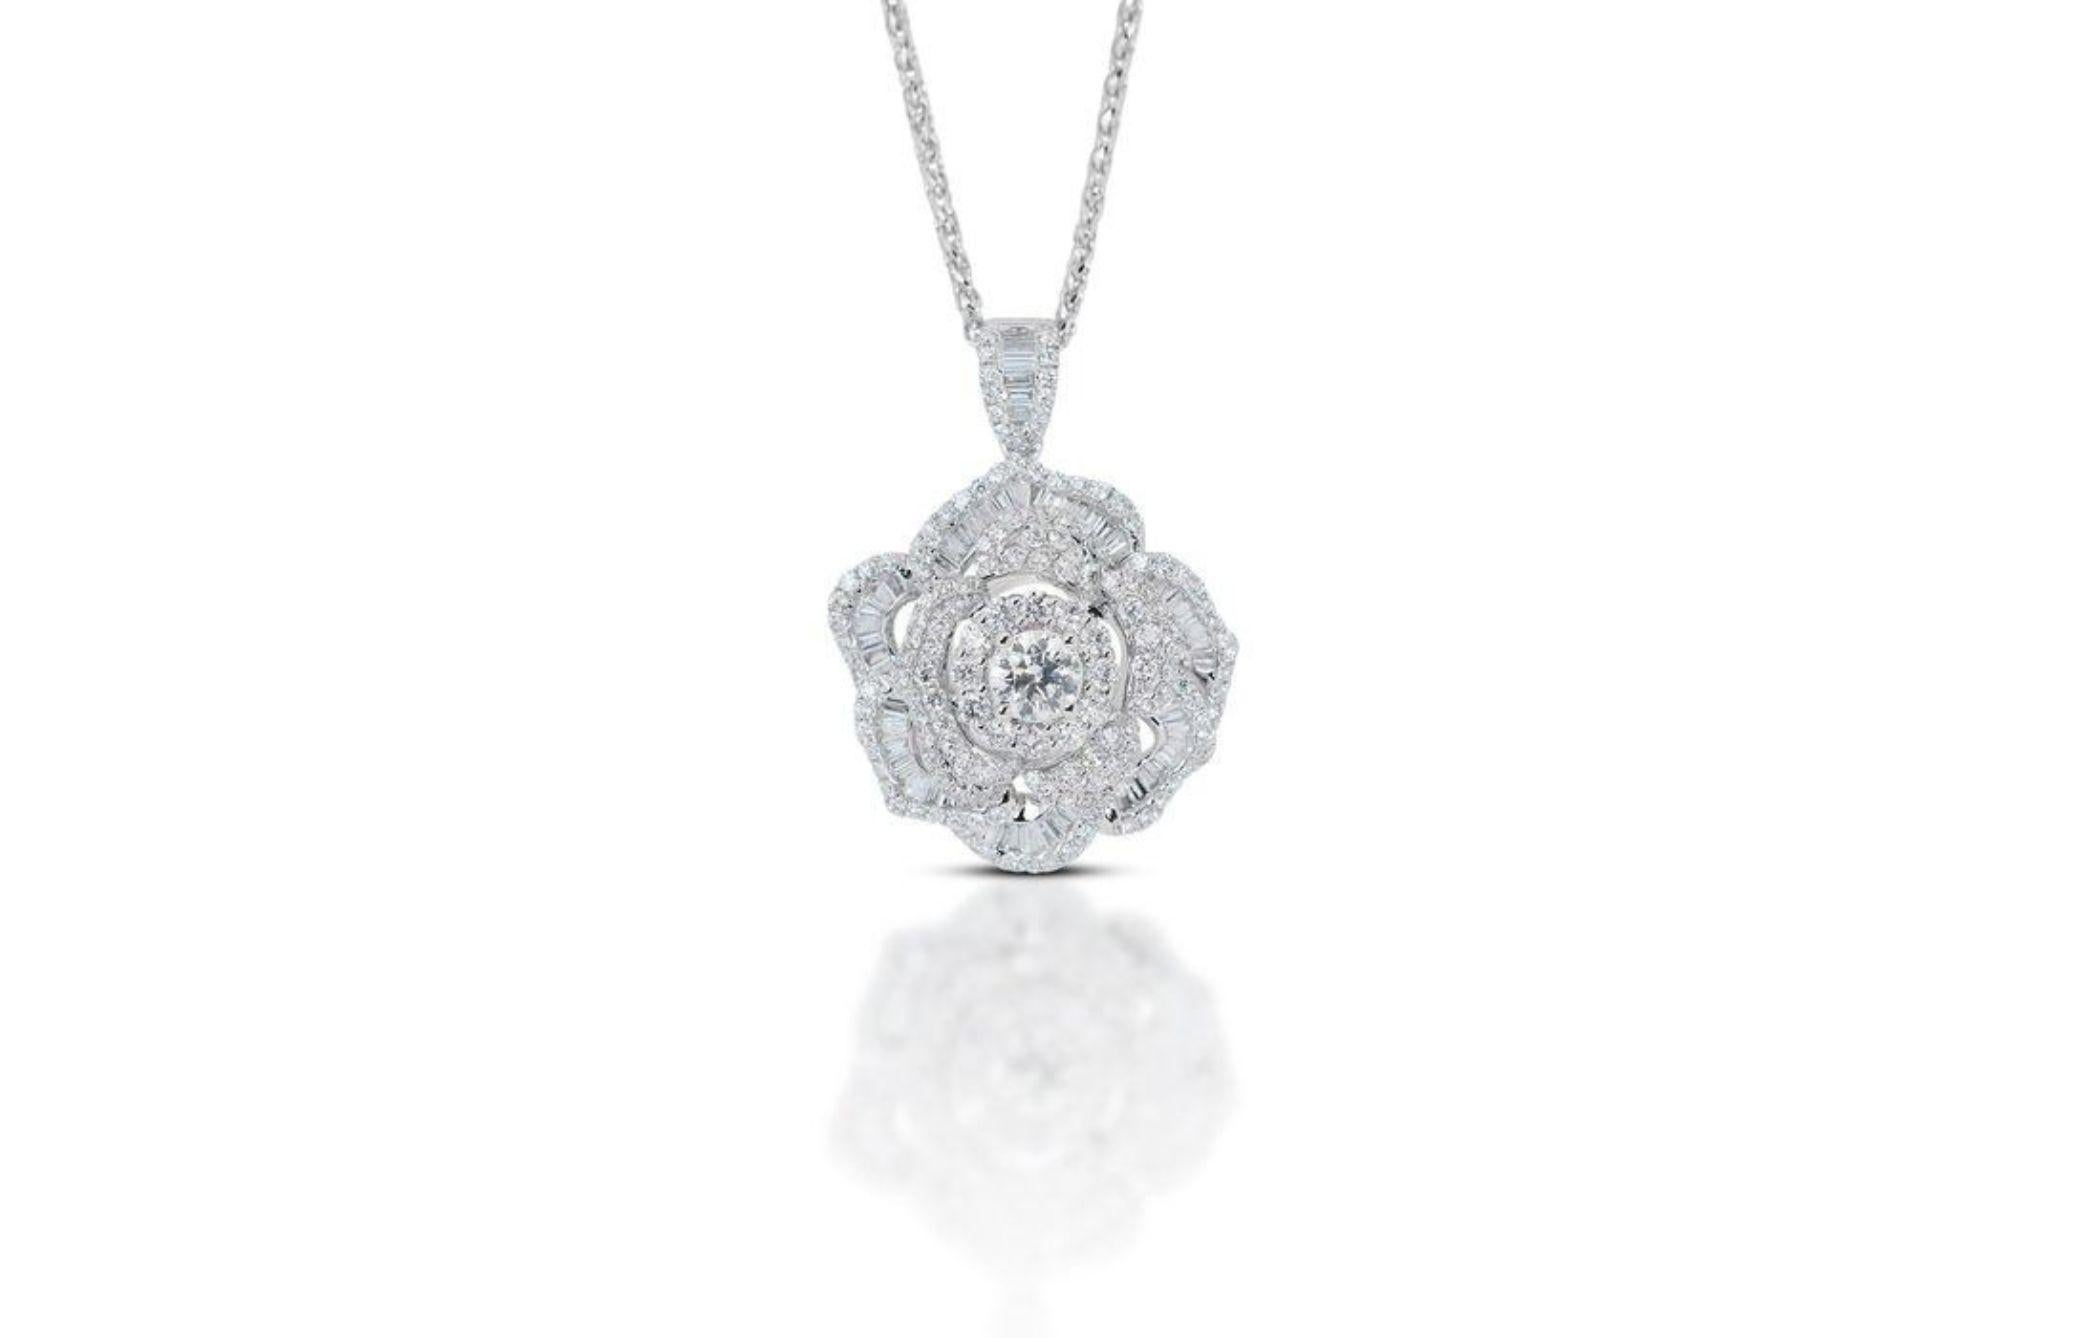 Dazzle with Exquisite Elegance og this 4.66 Carat Diamond Necklace. Own a masterpiece of brilliance with this stunning necklace featuring a captivating 2.56 carat round brilliant natural diamond pieces. Surrounded by a halo of 2.1 carats of